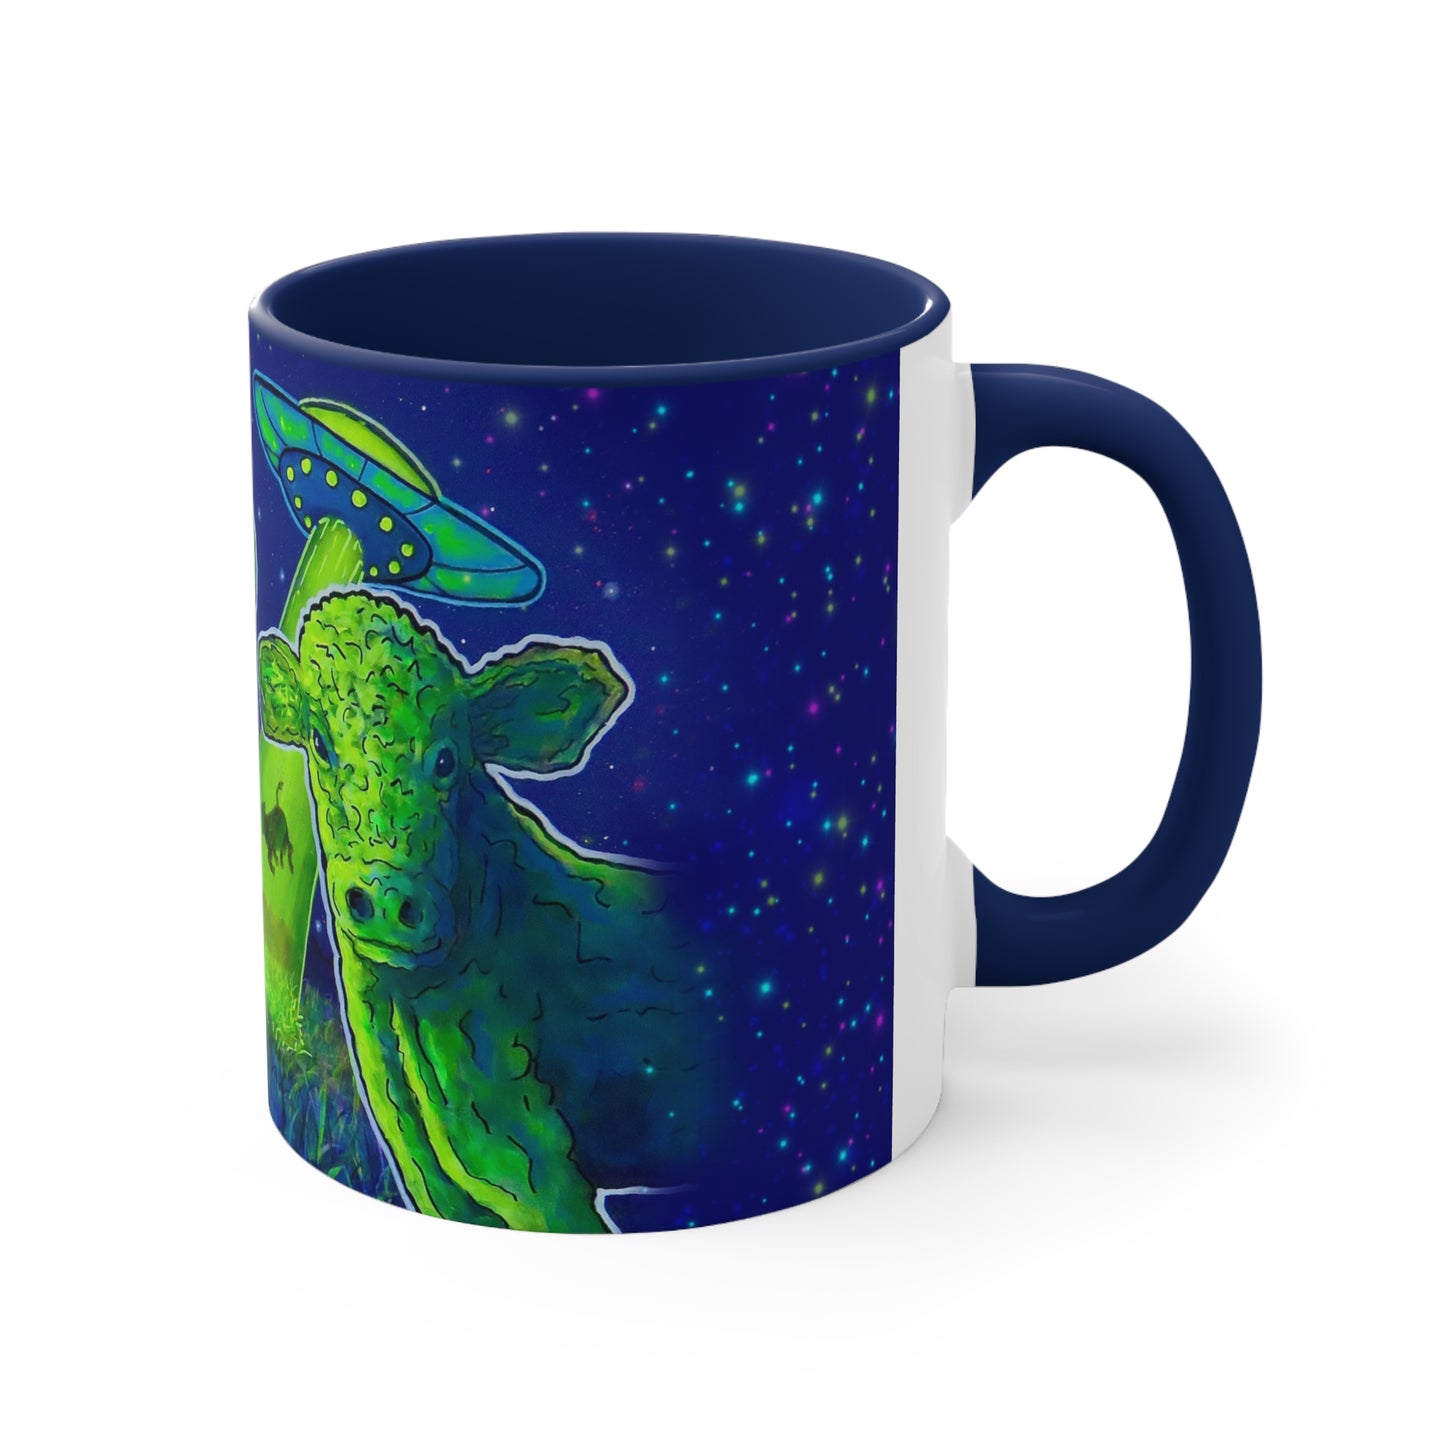 Cows In Outer Space - Coffee Mug -  C.V. Designs Abducted Series